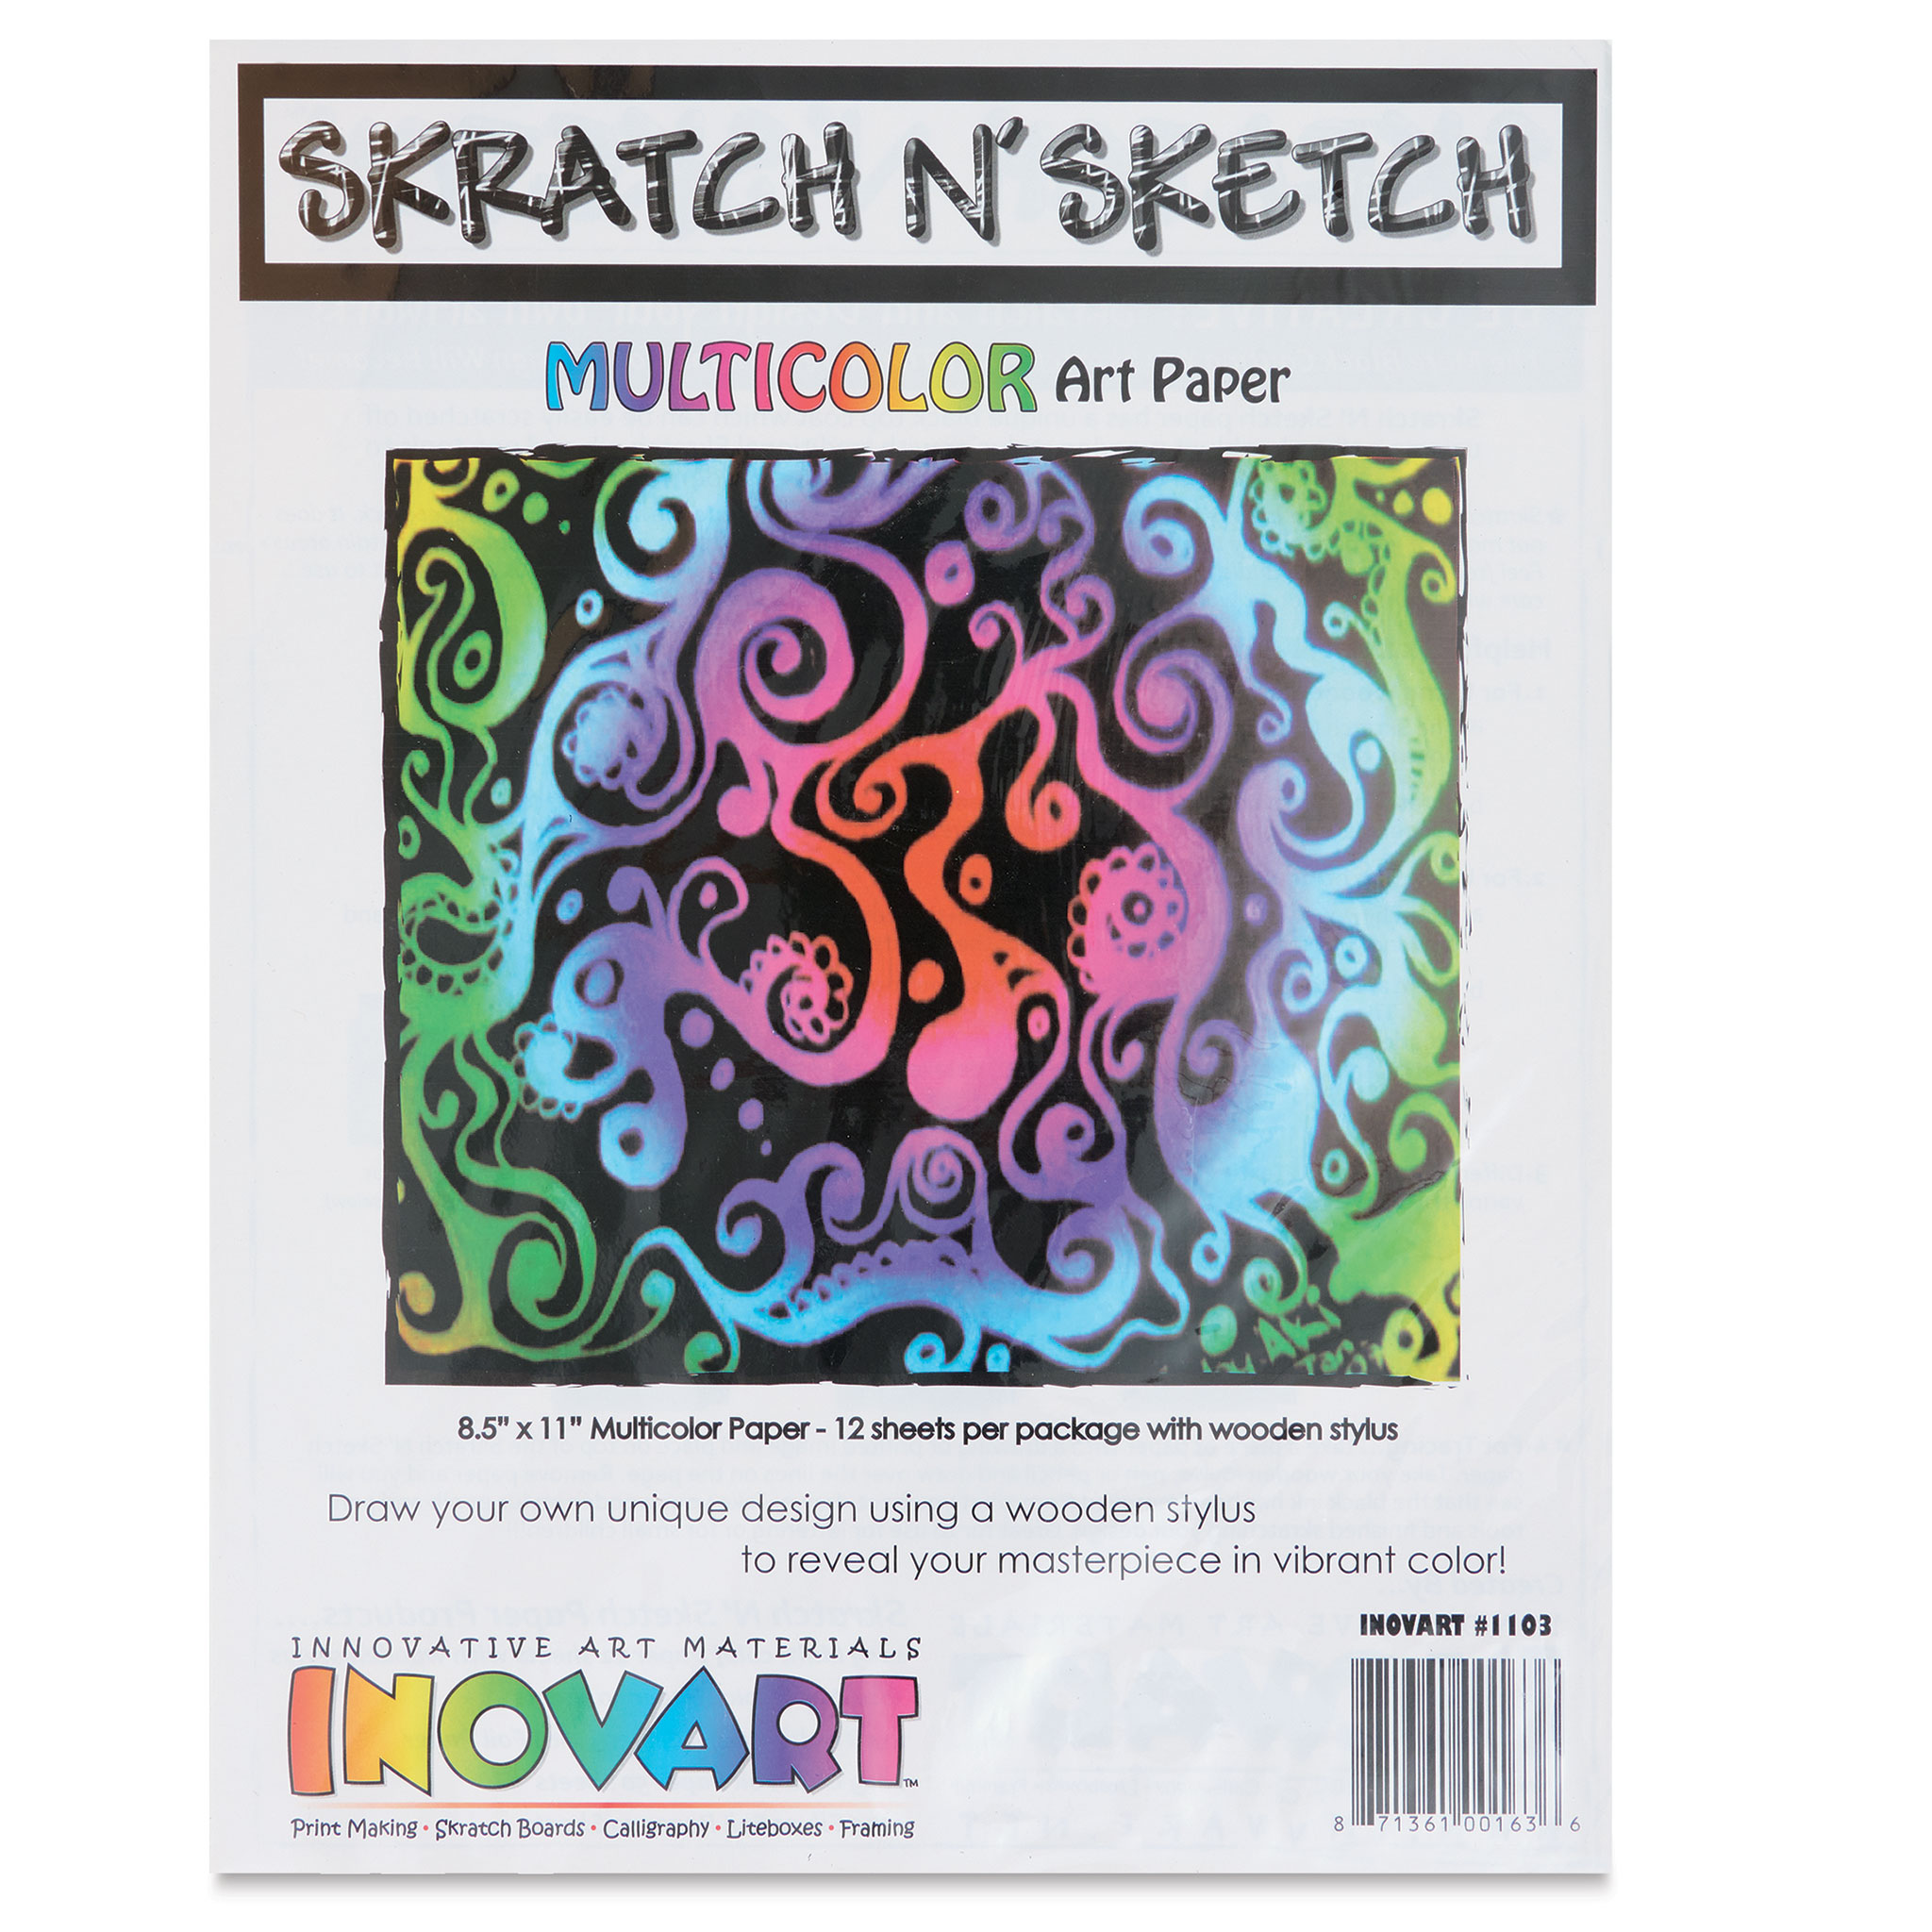 Scratch Paper Art Supplies Art Kit Gifts for 3 4 5 6 7 8 9 10 Year